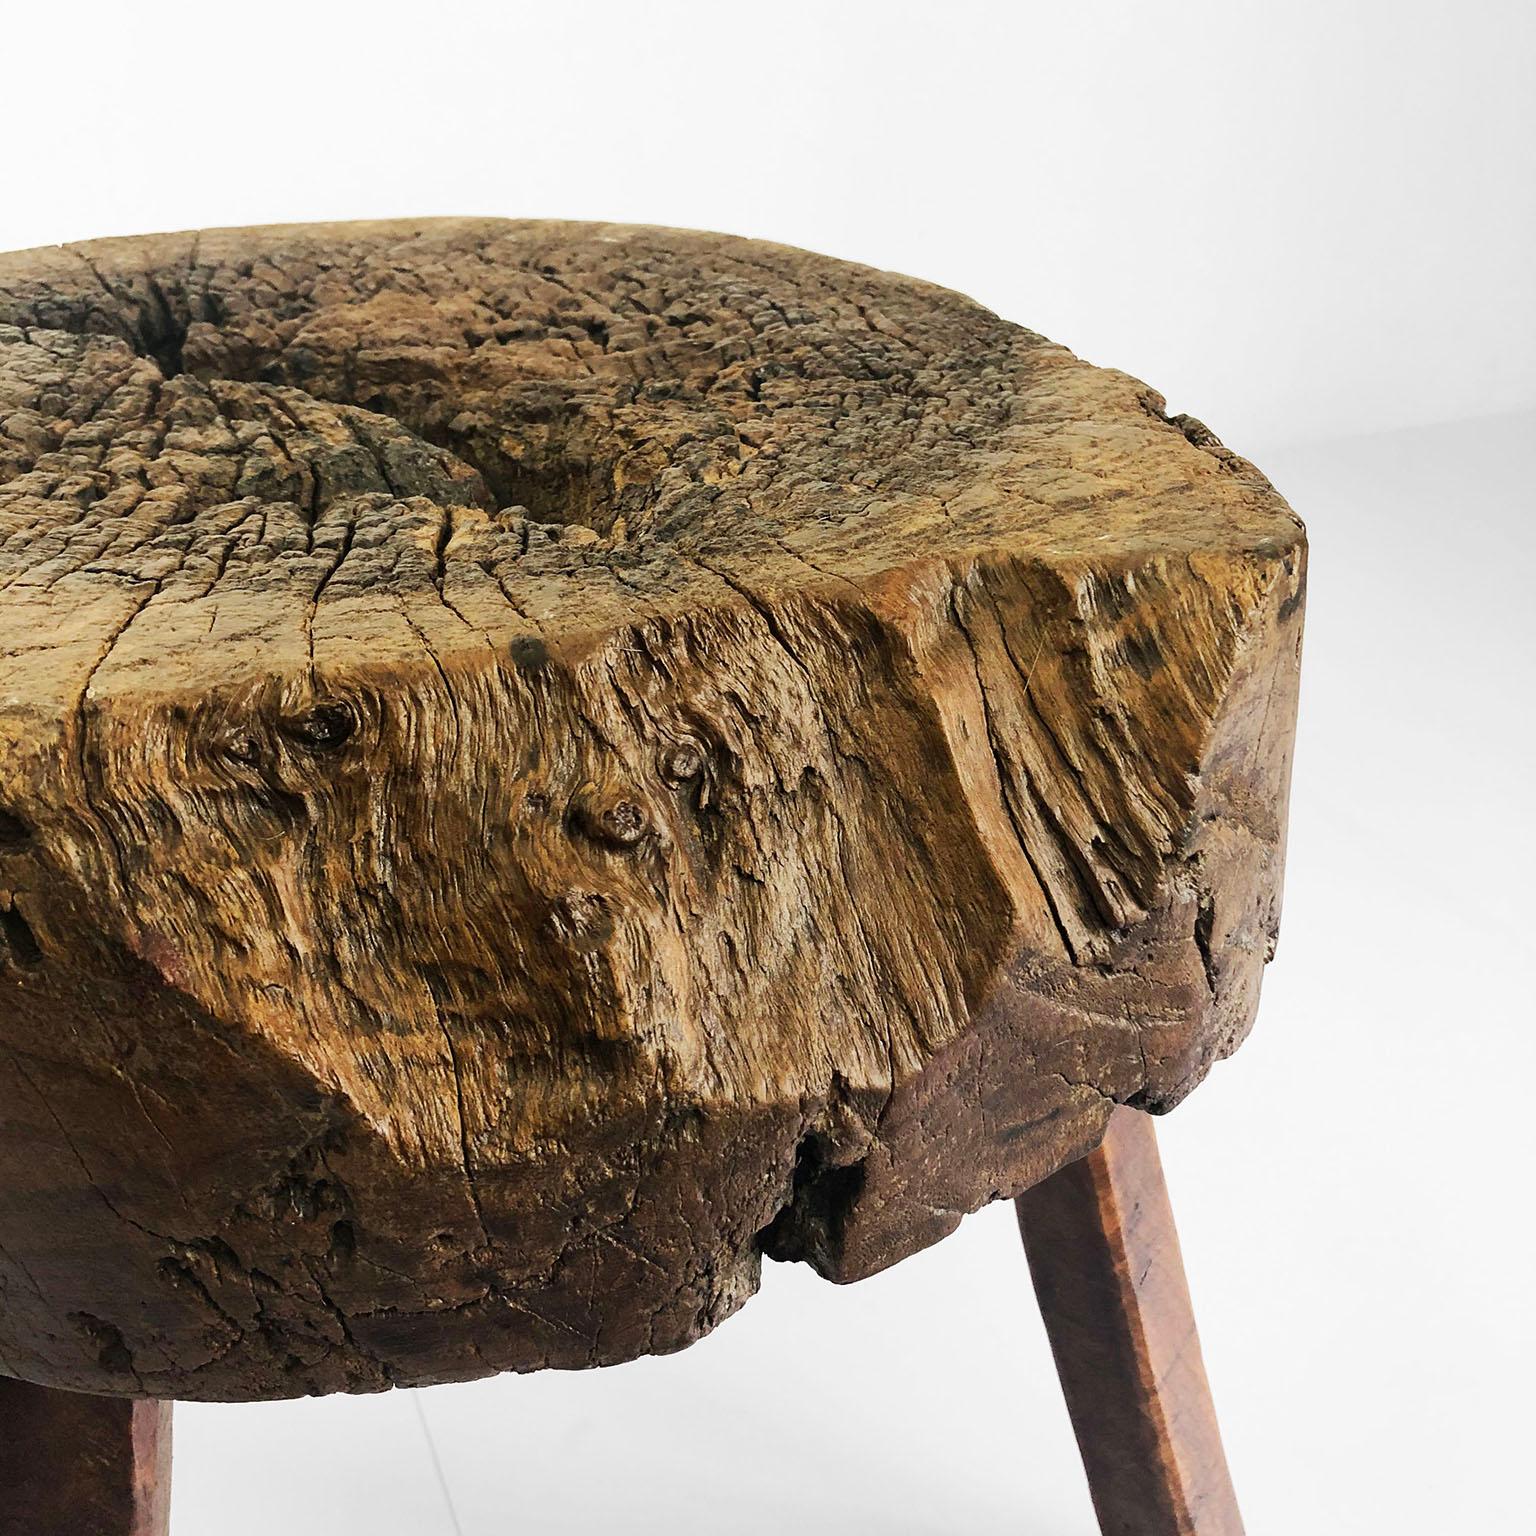 We offer this stool made in Mesquite hardwood, circa 1930. Made in Mexico hand carved using machete and chisel. Fully restored. Clear markings showing age and heavy use, ready to use as stool or side table.